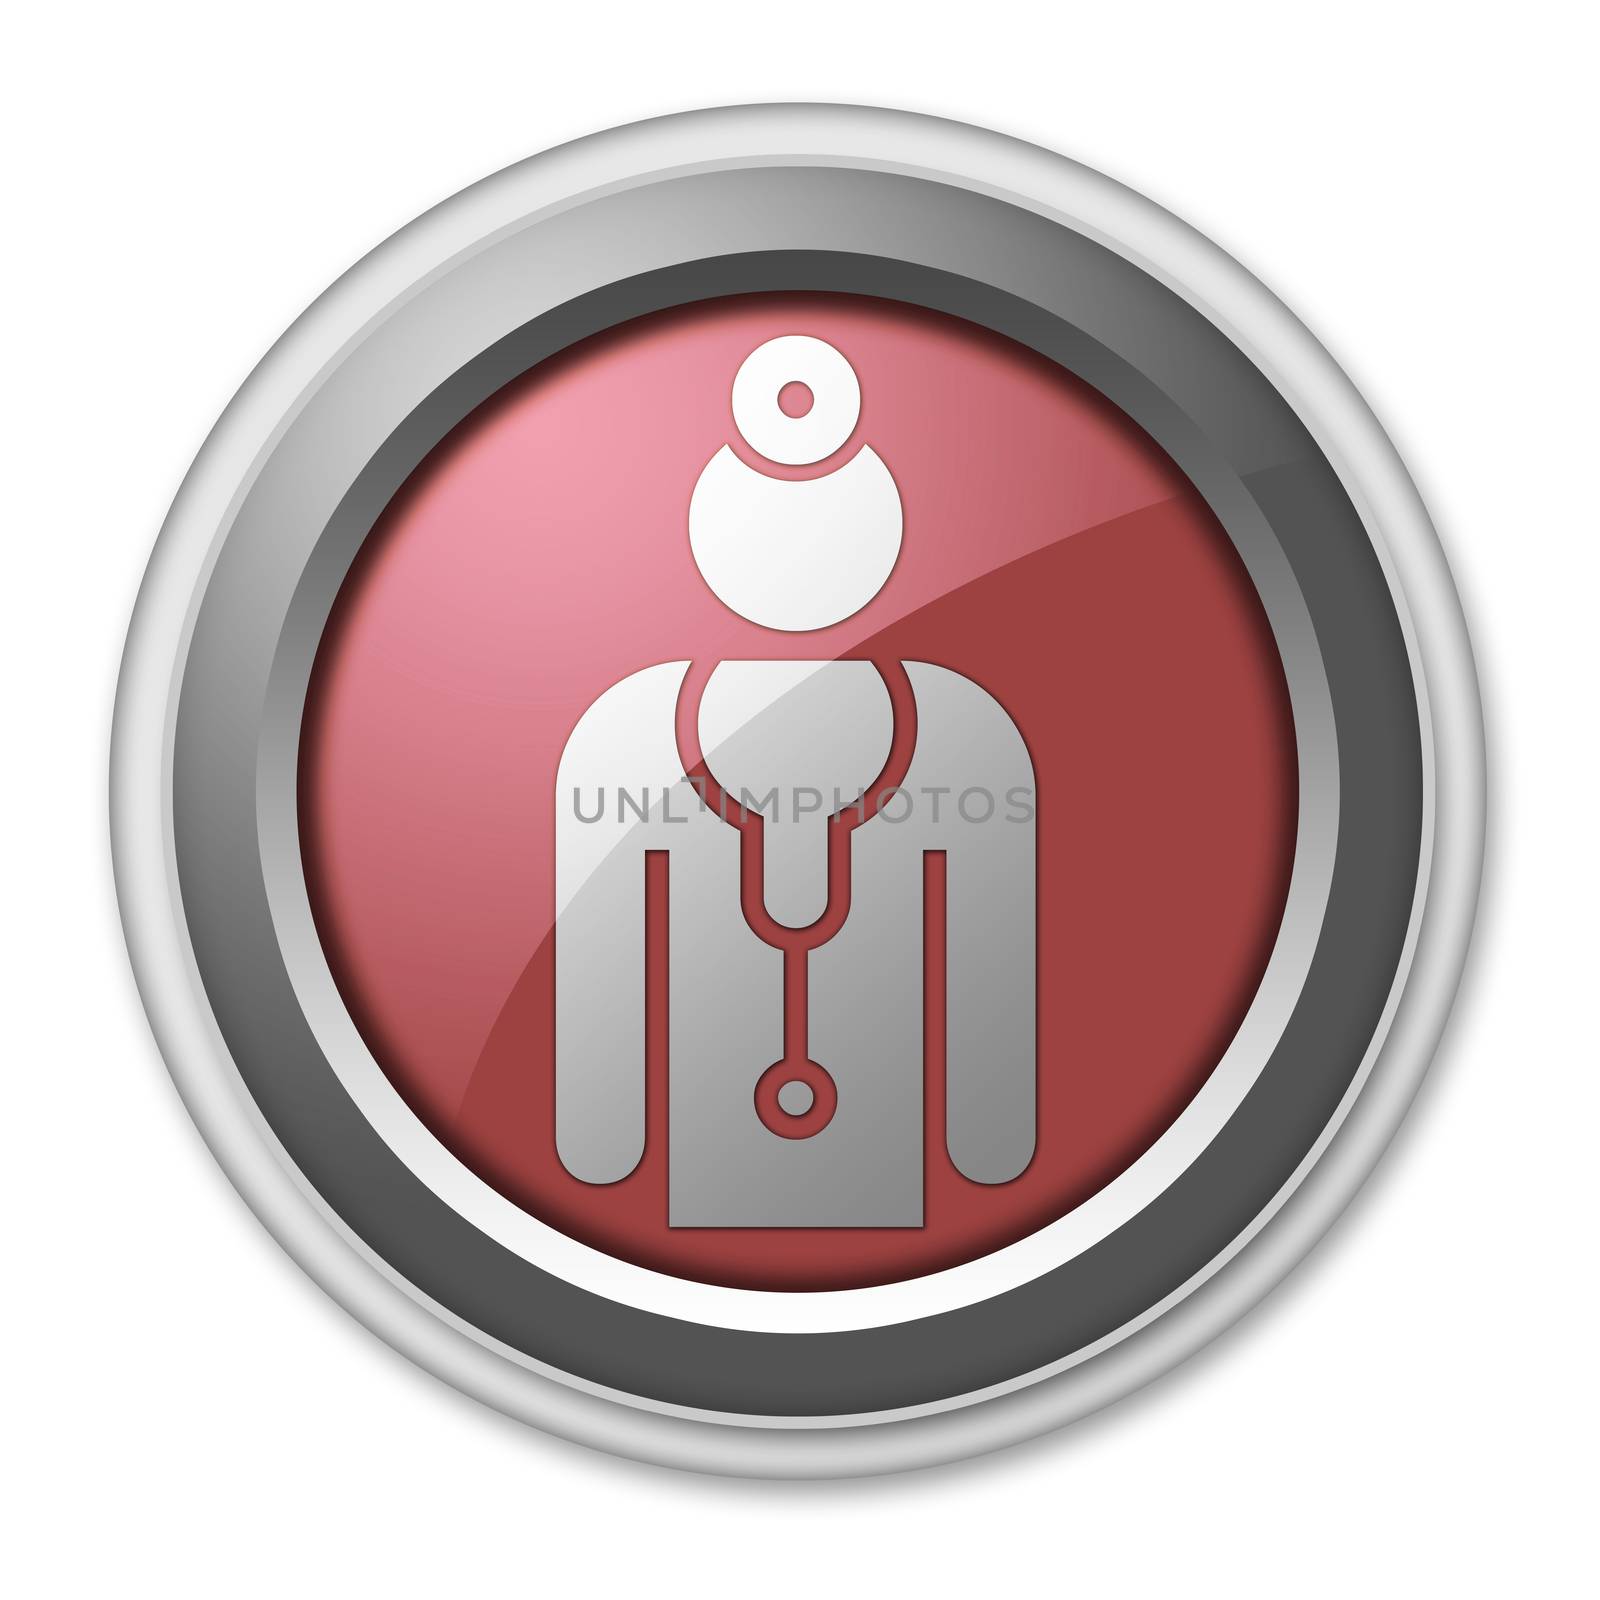 Icon, Button, Pictogram with Physician symbol